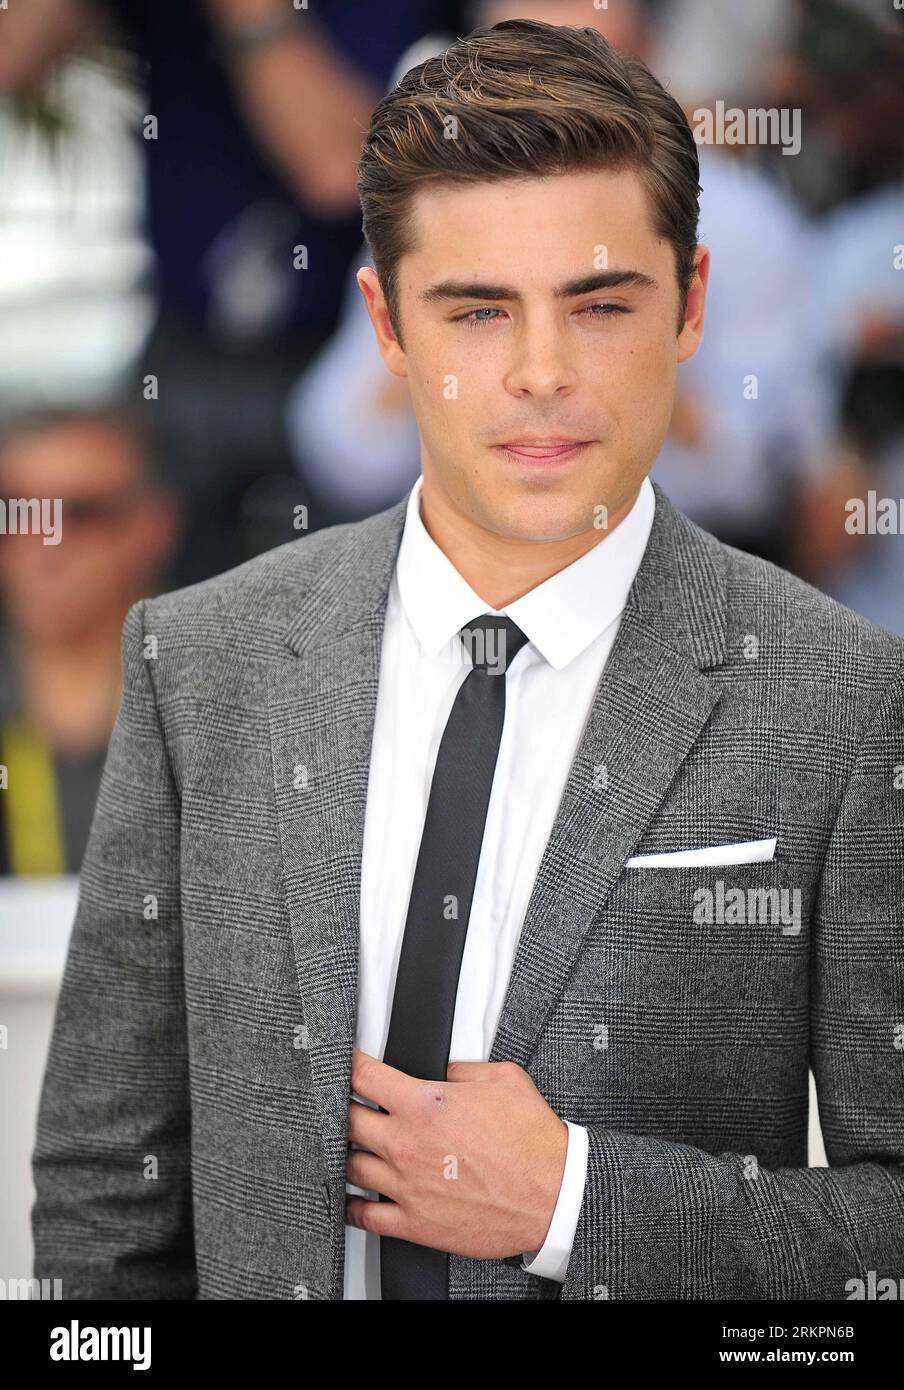 Bildnummer: 58030787  Datum: 24.05.2012  Copyright: imago/Xinhua (120524) -- CANNES, May 24, 2012 (Xinhua) -- Actor Zac Efron poses during a photocall for the film The Paperboy directed by Lee Daniels, at the 65th Cannes Film Festival, in Cannes, southern France, May 24, 2012. (Xinhua/Ye Pingfan)(srb) FRANCE-CANNES-FILM FESTIVAL-PHOTOCALL PUBLICATIONxNOTxINxCHN Kultur Entertainment People Film 65. Internationale Filmfestspiele Cannes Porträt x0x xkg 2012 hoch      58030787 Date 24 05 2012 Copyright Imago XINHUA  Cannes May 24 2012 XINHUA Actor Zac Efron Poses during a photo call for The Film T Stock Photo